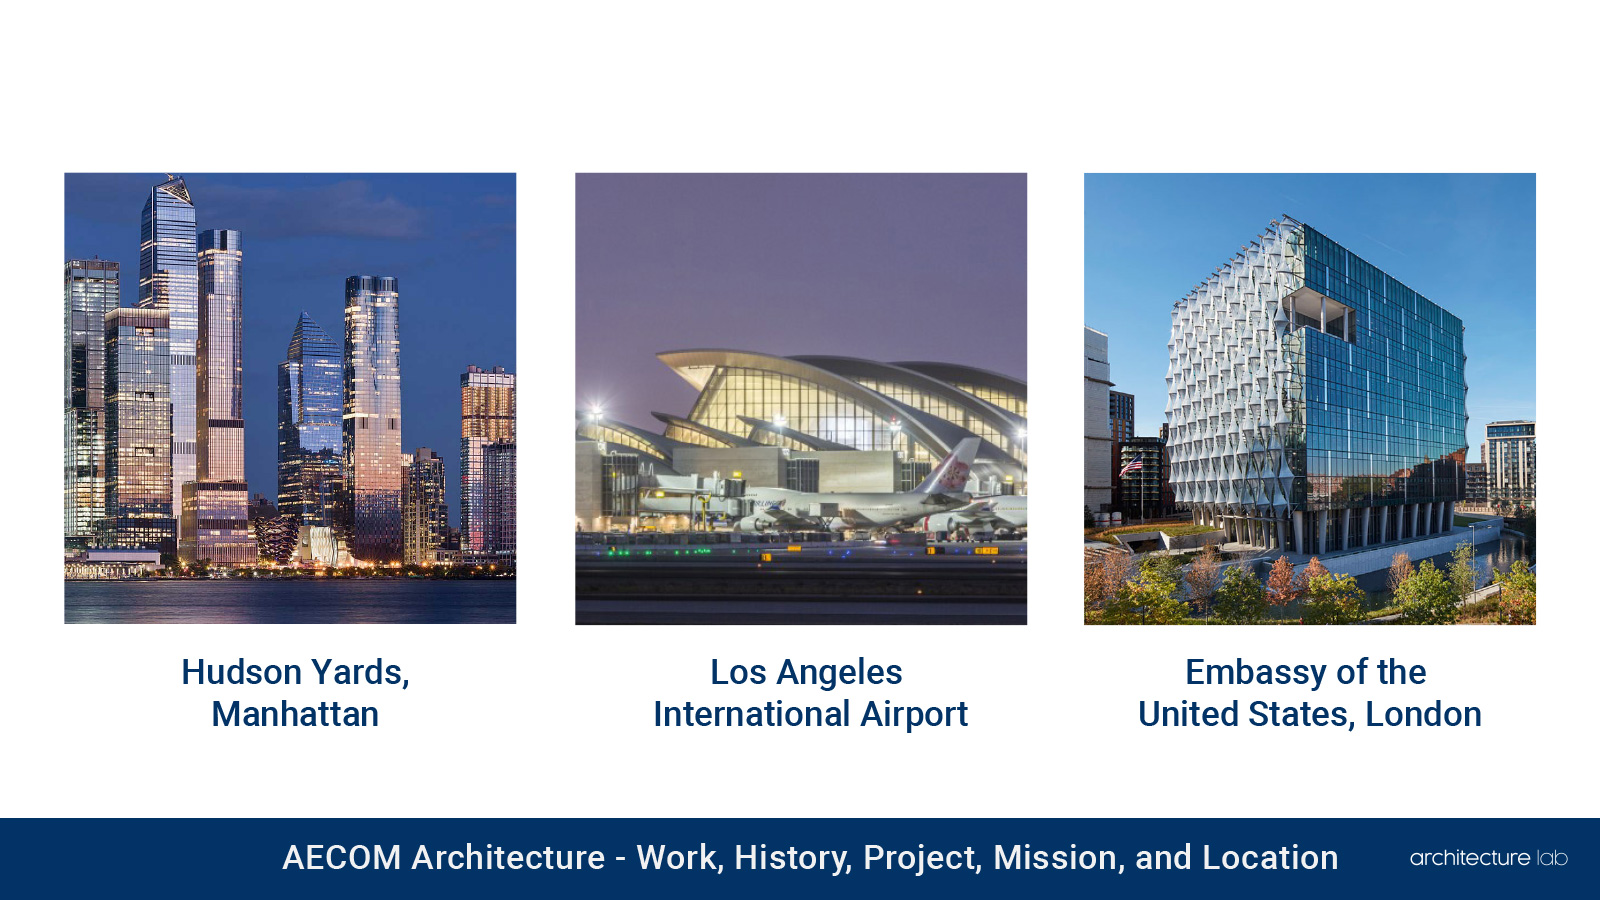 Aecom architecture: work, history, project, mission, and location